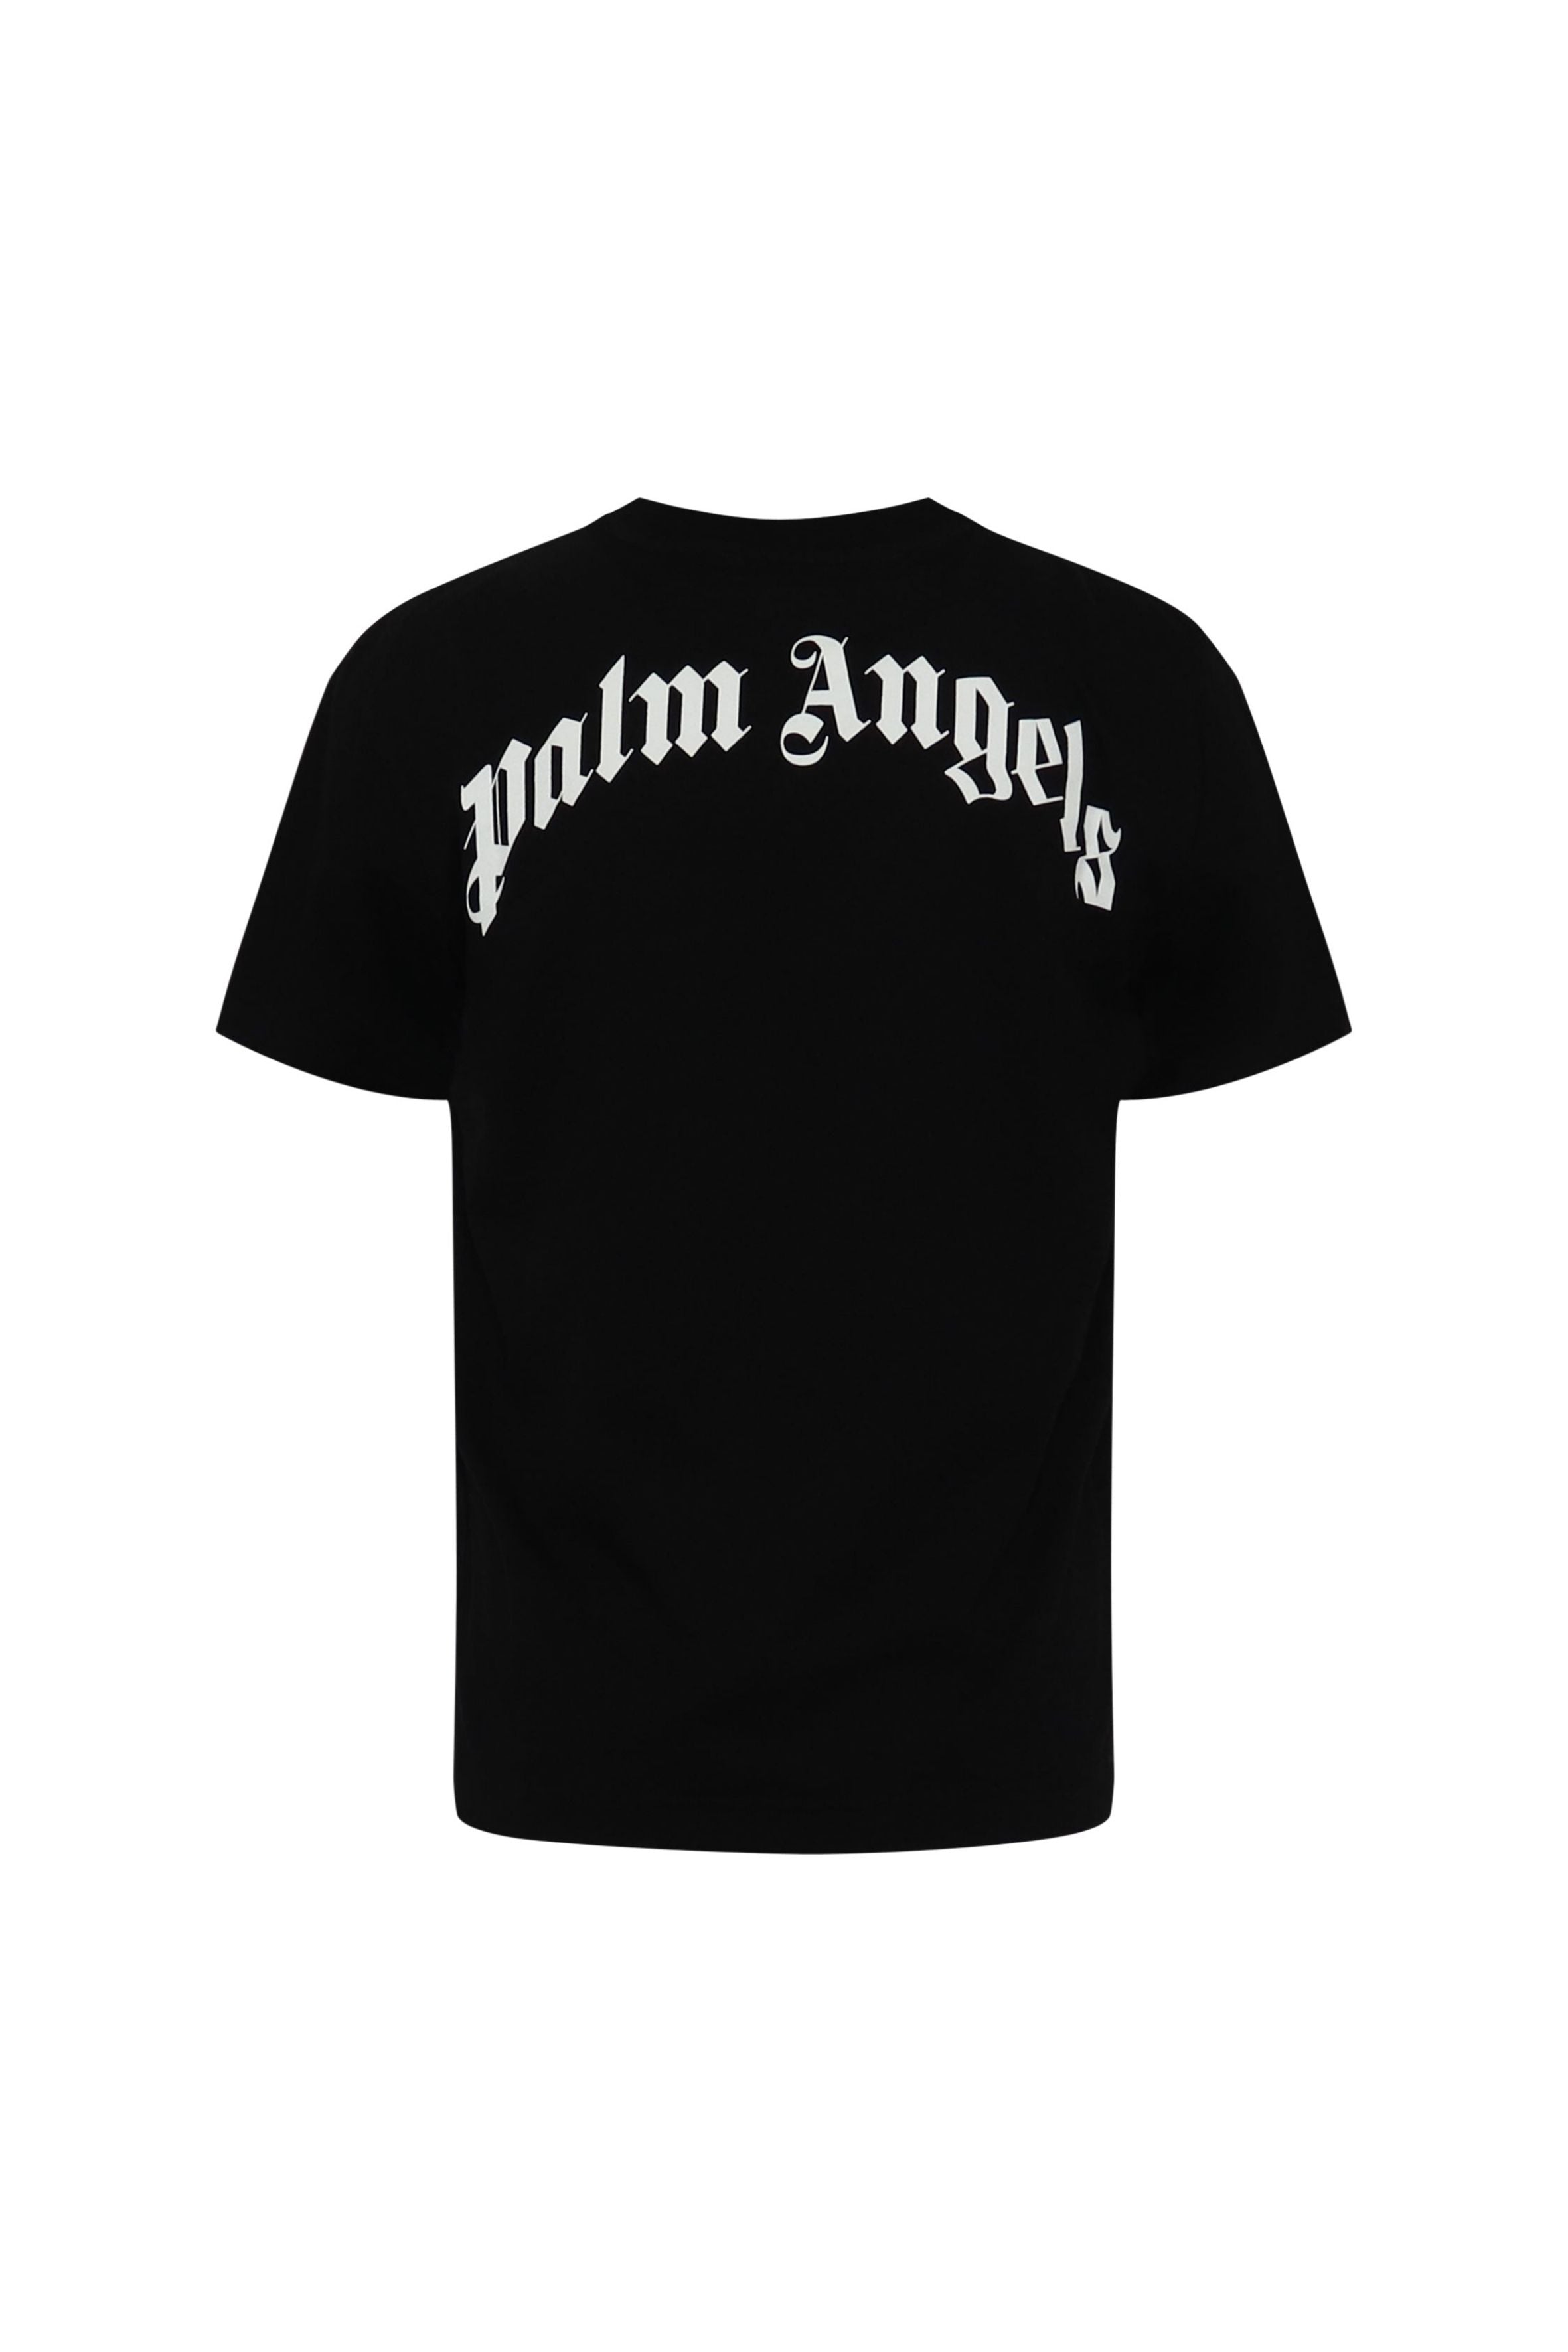 Palm Angels Kill The Bear Tee Black (Brand new with tags)